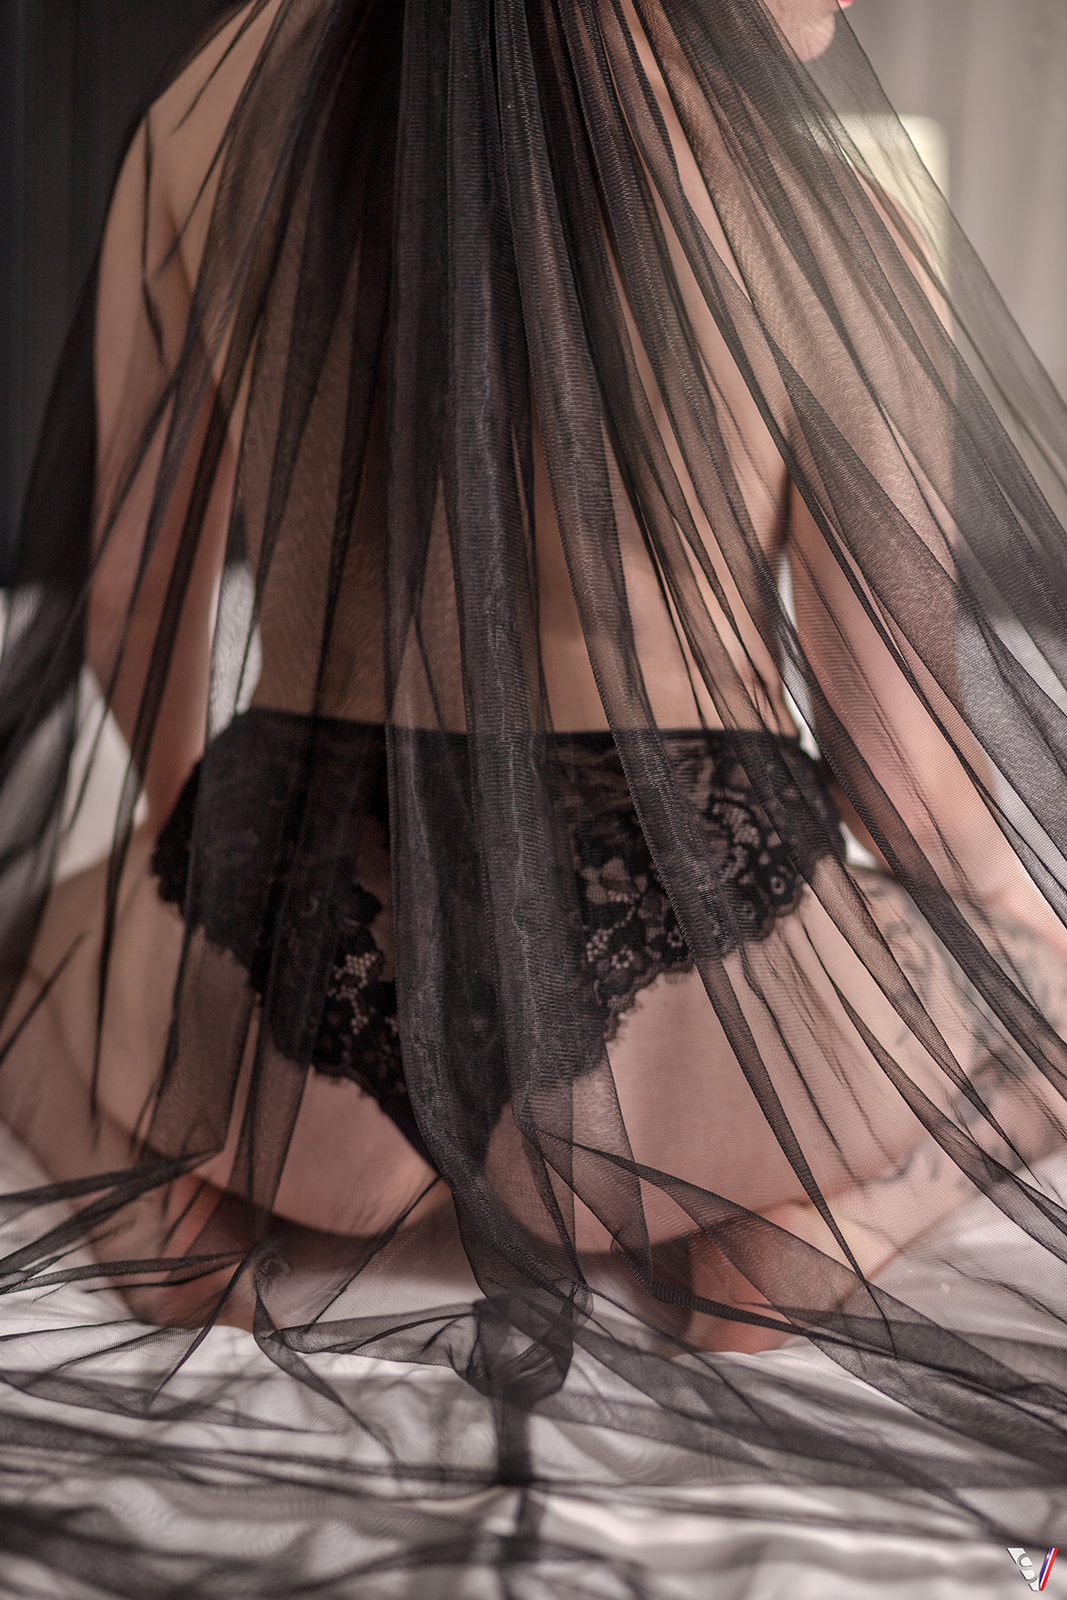 The black veil, lace panty. and top less black pose of the bride. 